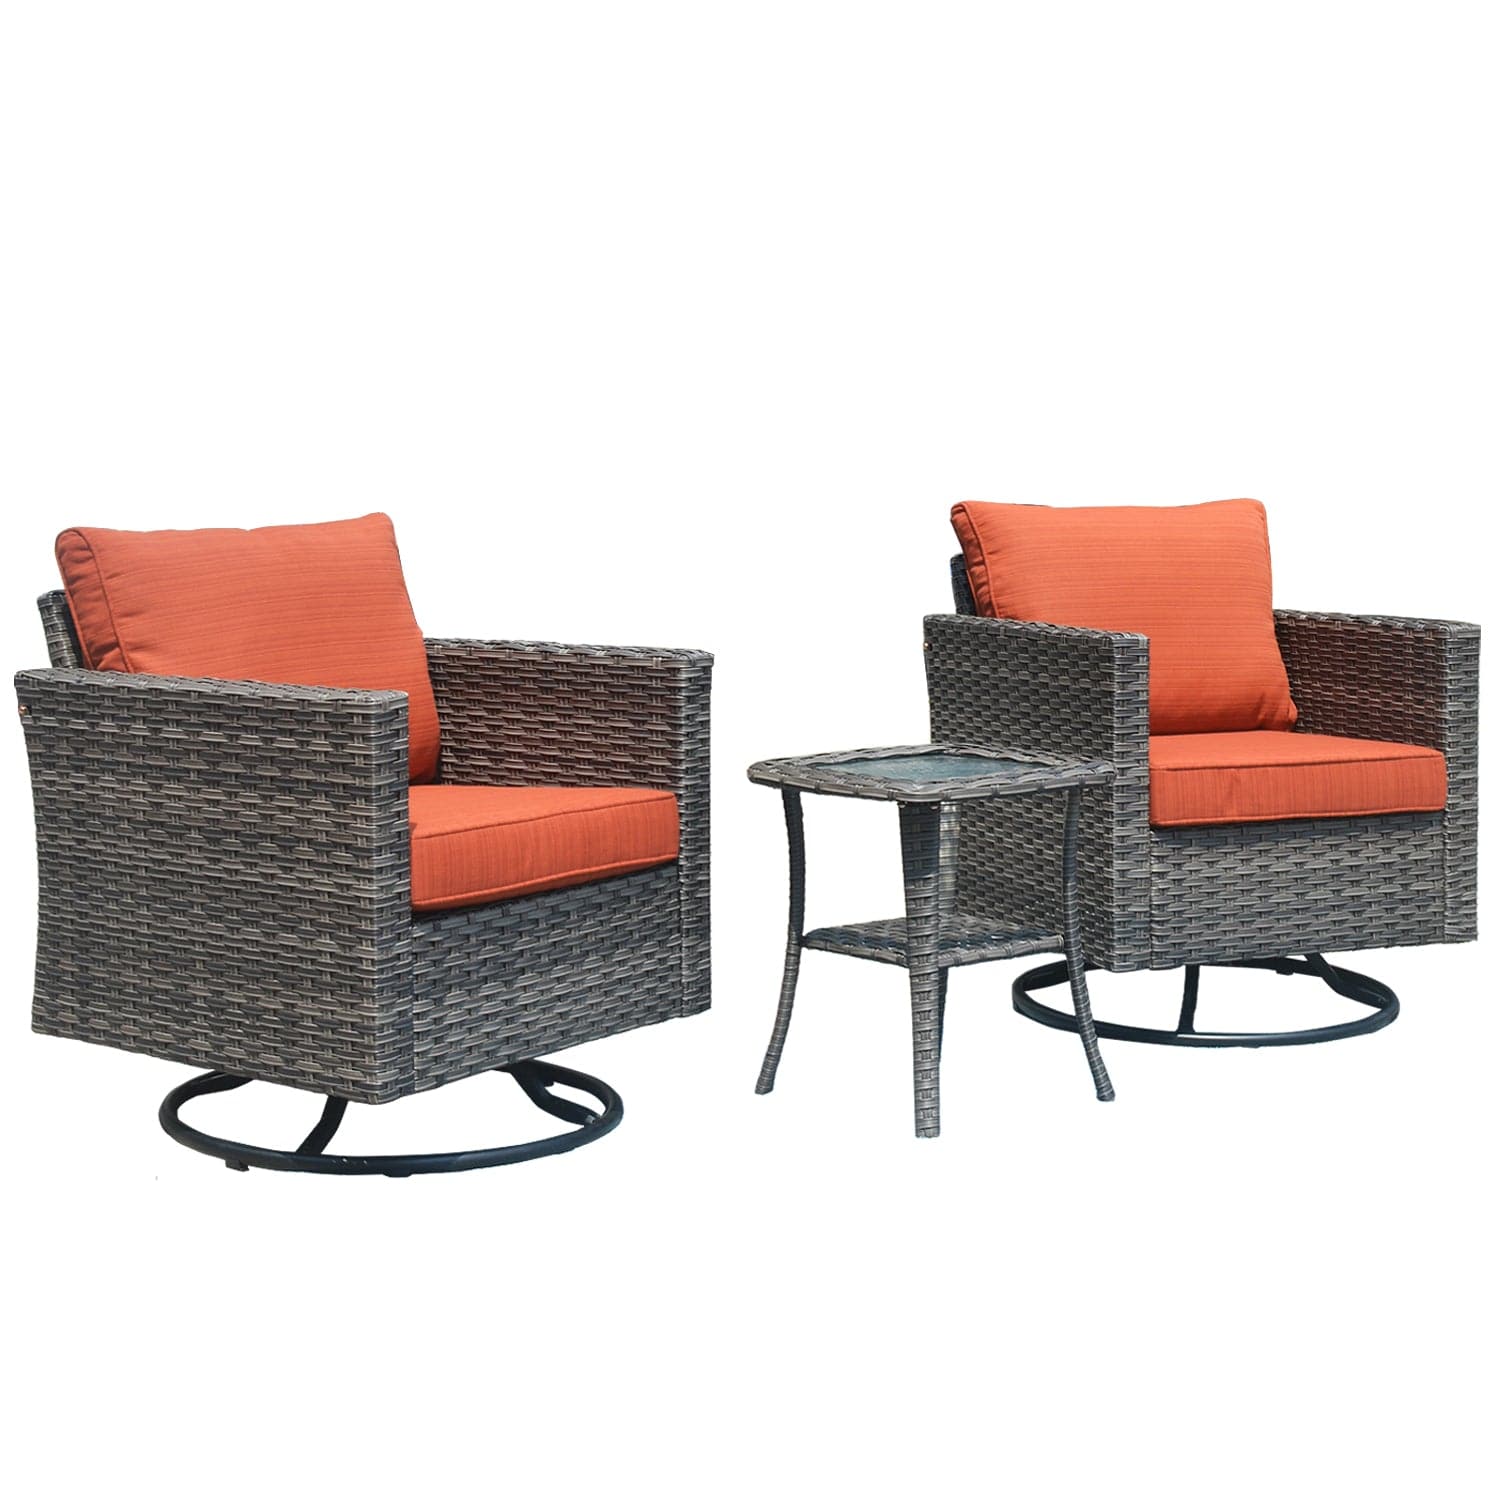 Ovios Patio Furniture 3-Piece Set with Swivel Chairs and Table Square Shape Armrest